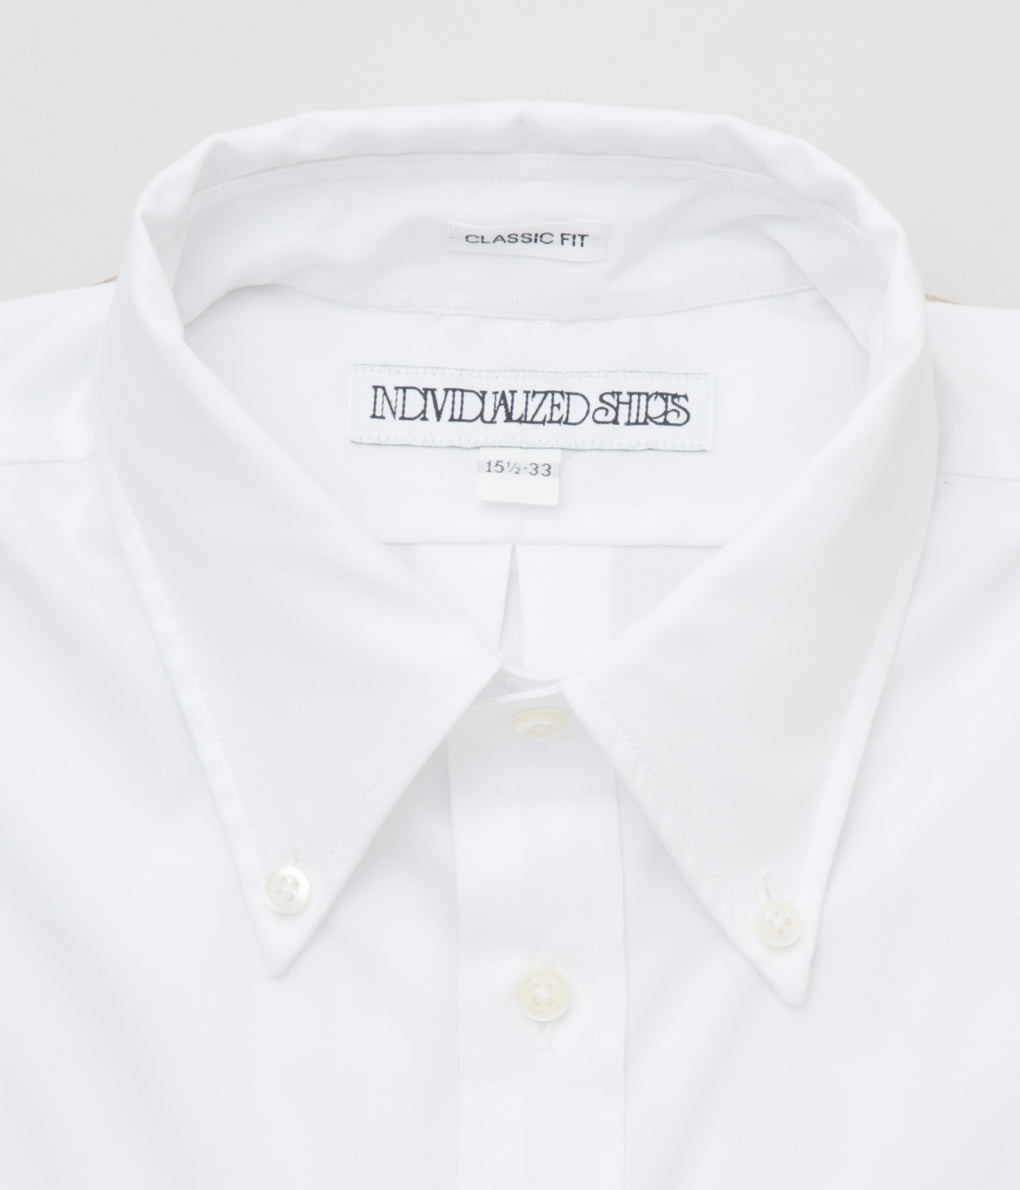 INDIVIDUALIZED SHIRTS "PINPOINT OXFORD (CLASSIC FIT BUTTON DOWN SHIRT)"(WHITE)